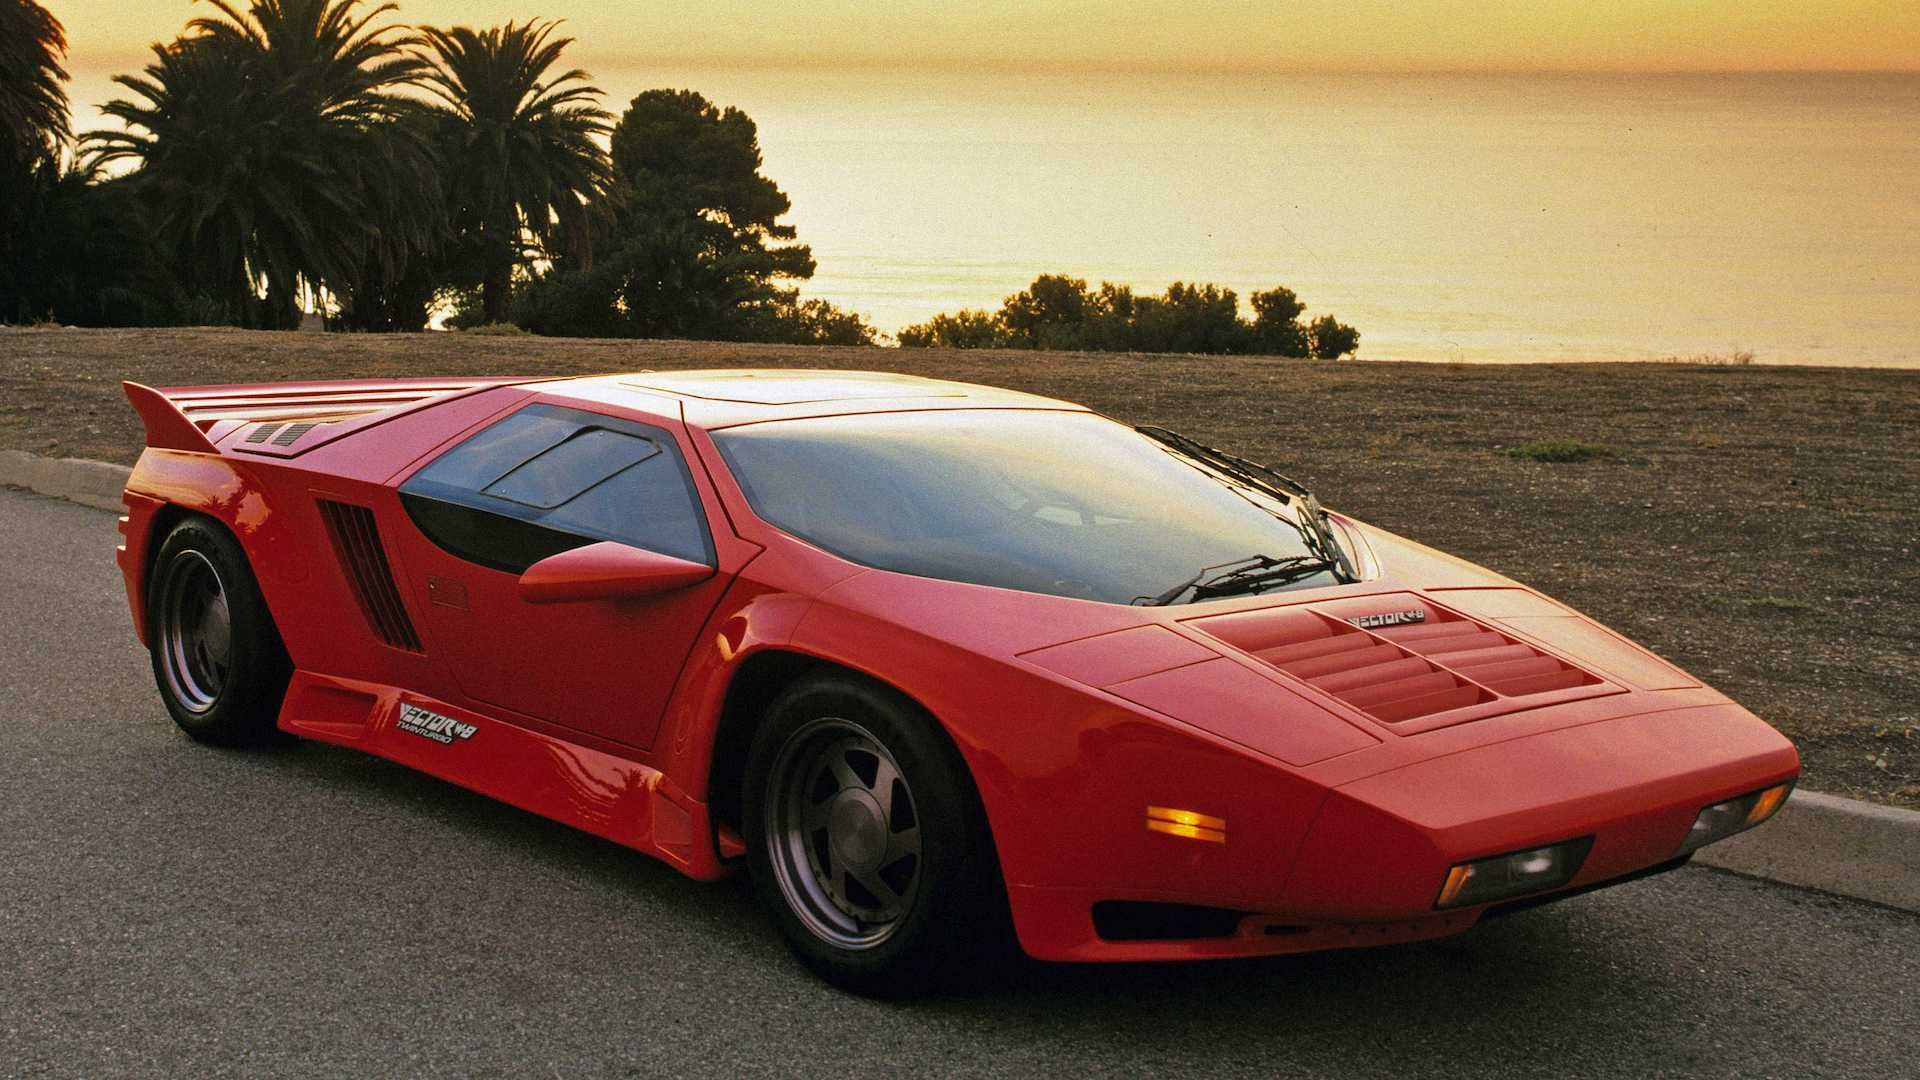 The Vector W8 marked America’s entry into the supercar market dominated by Ferrari and Lamborghini